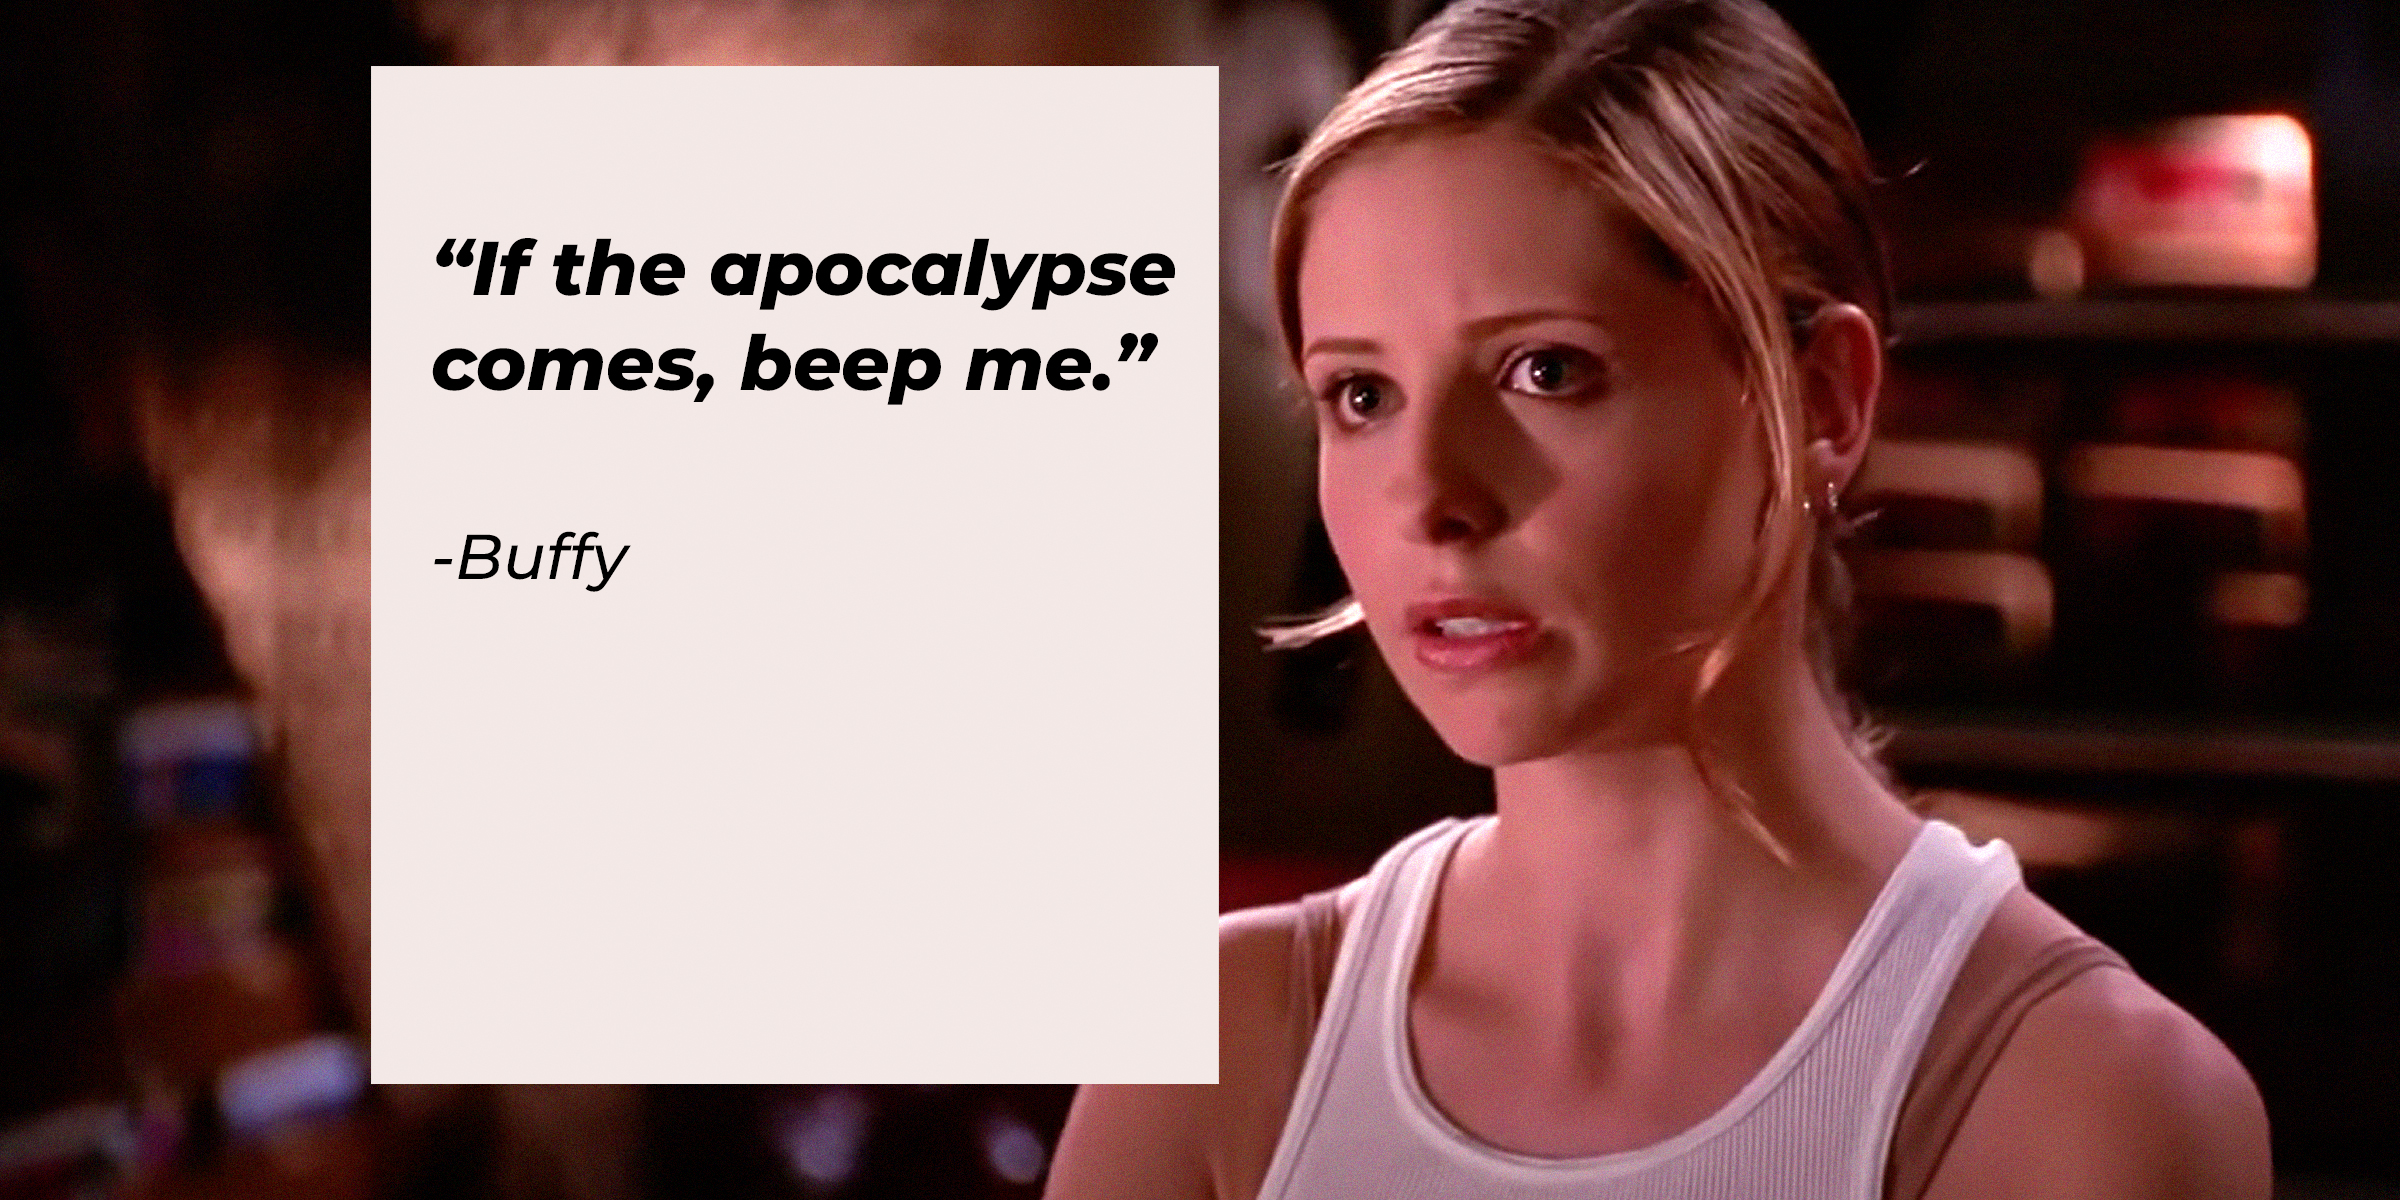 Buffy, with her quote, “If the apocalypse comes, beep me.” | Source: facebook.com/BuffyTheVampireSlayer